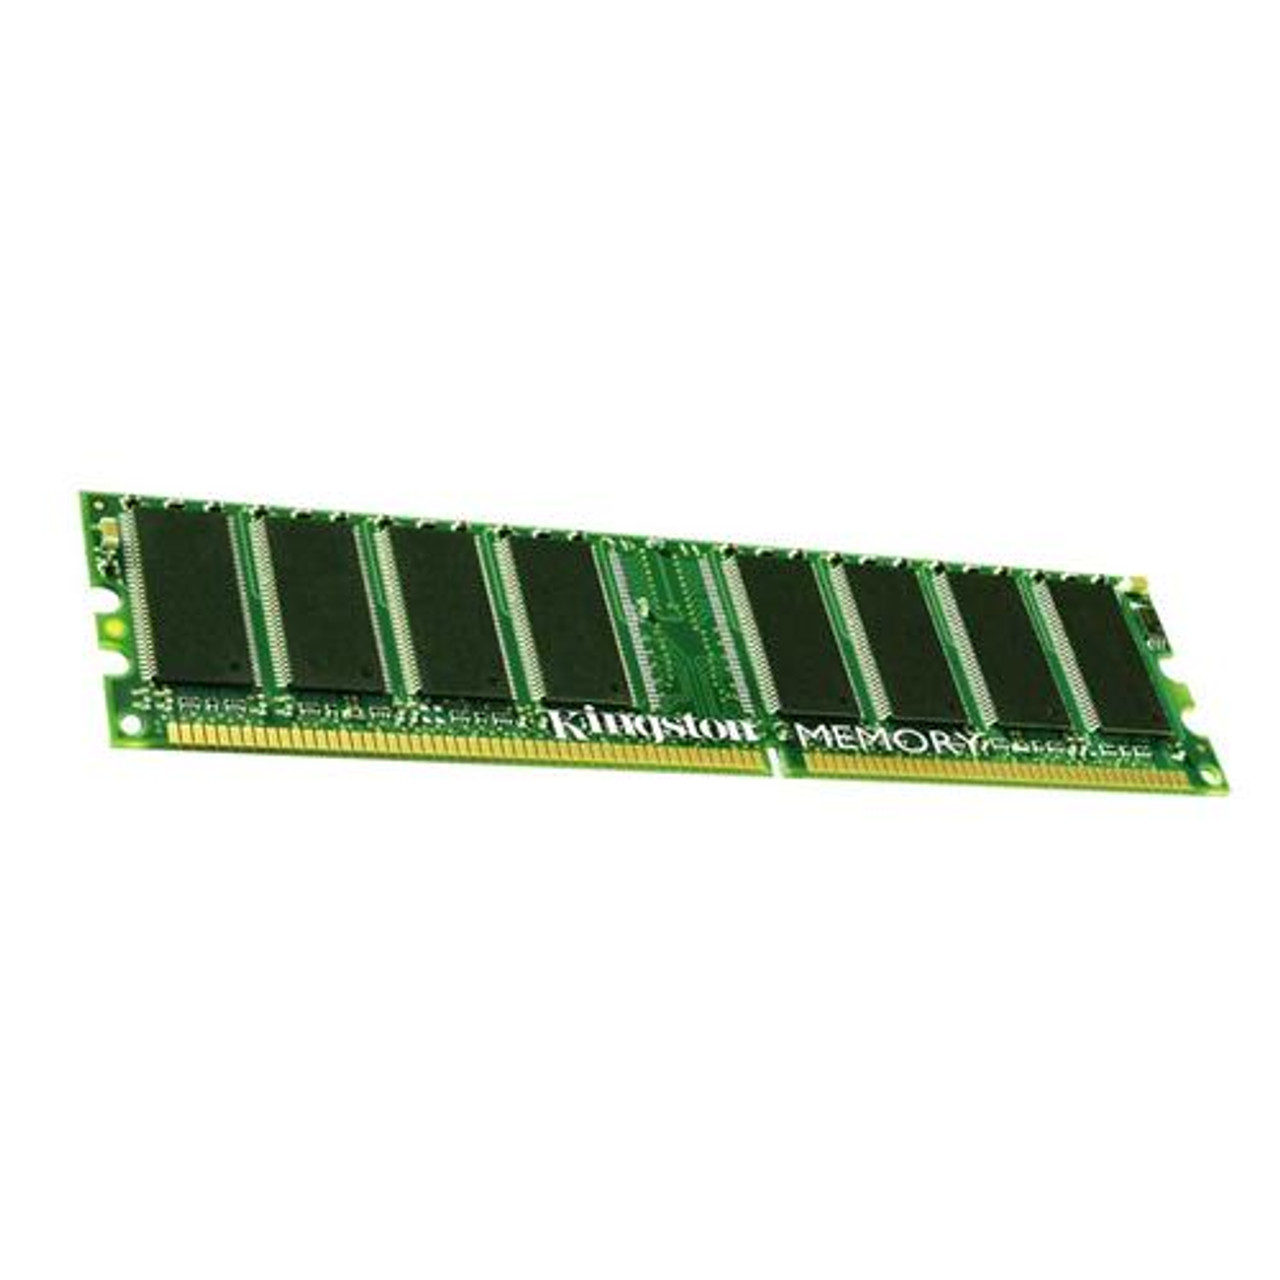 22-0013-001 Kingston 512MB PC133 133MHz ECC Unbuffered CL3 168-Pin DIMM Memory Module for Chaparral Network